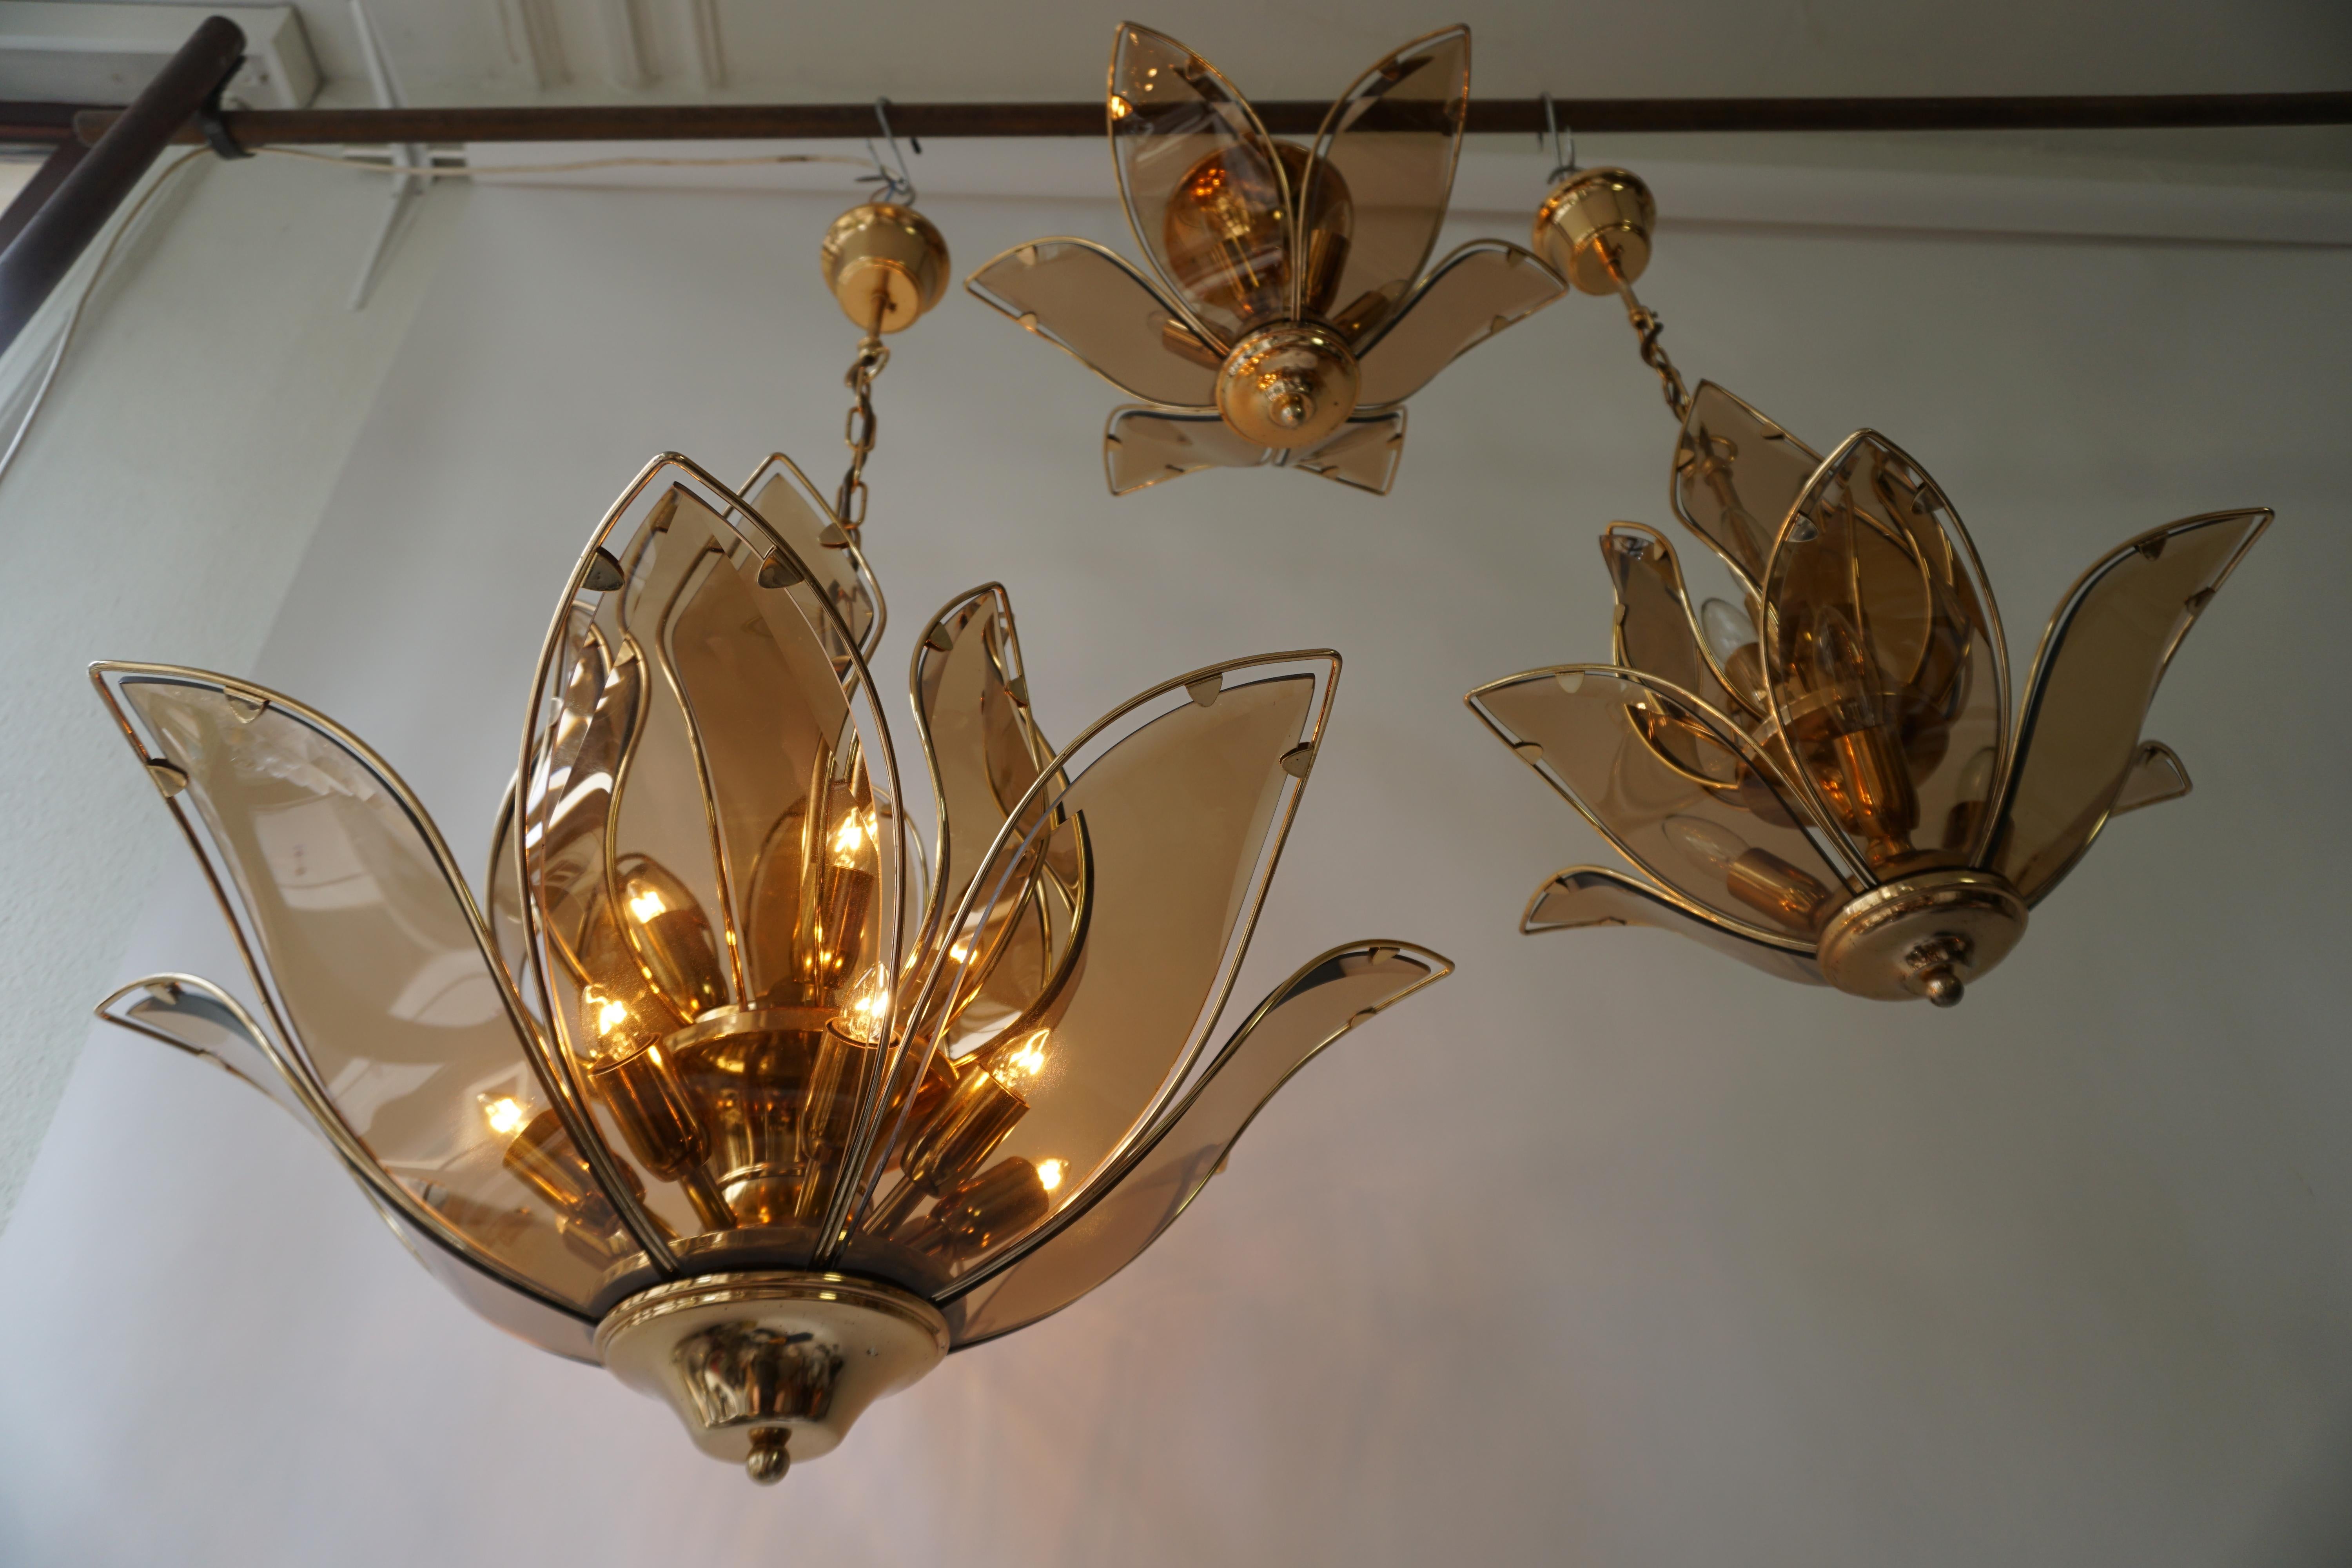 Italian Set of Three Midcentury Chandeliers in Brass and Glass